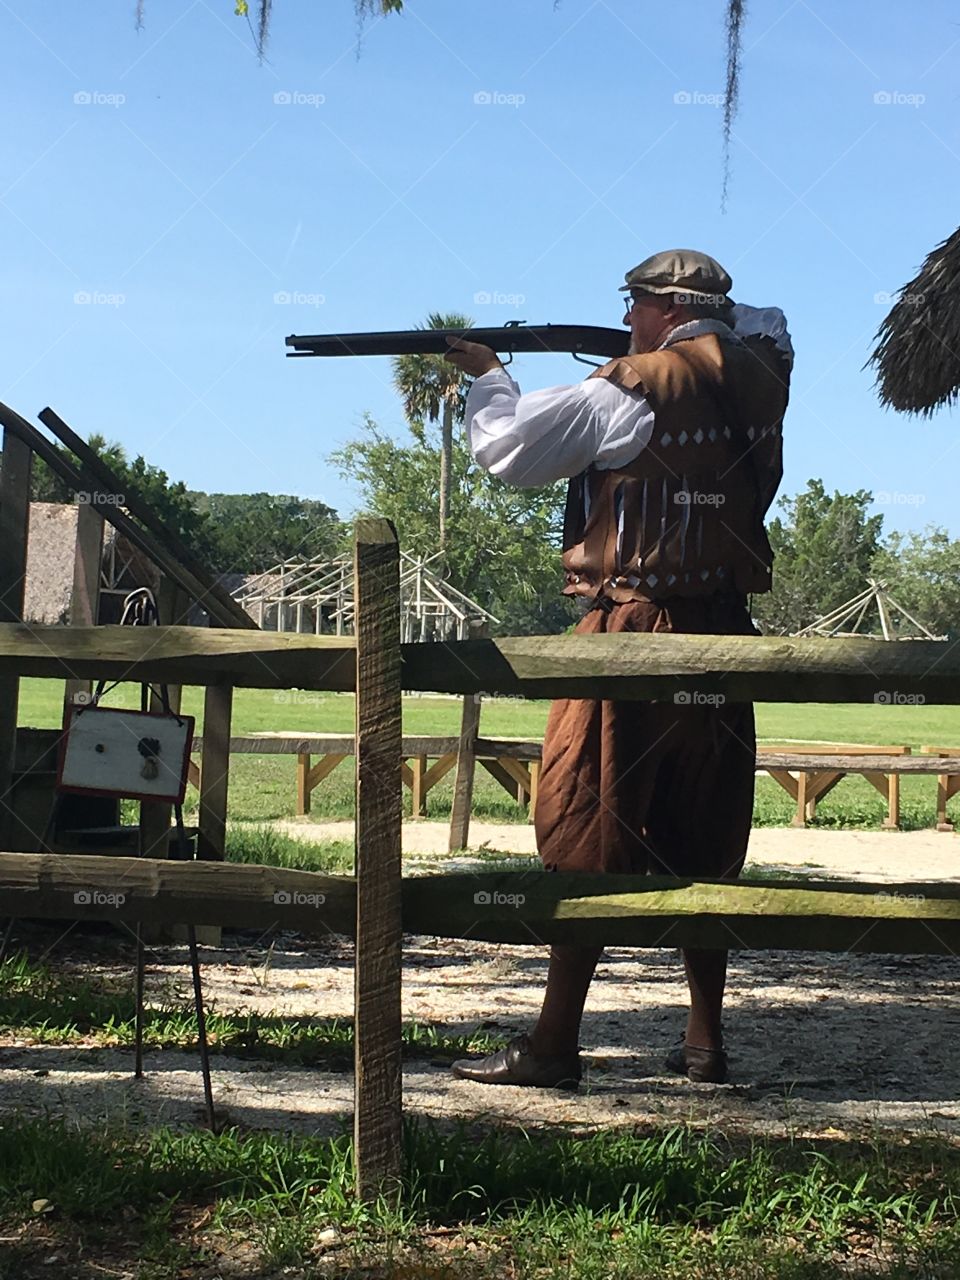 Black powder demo at Fountain of Youth in Florida 